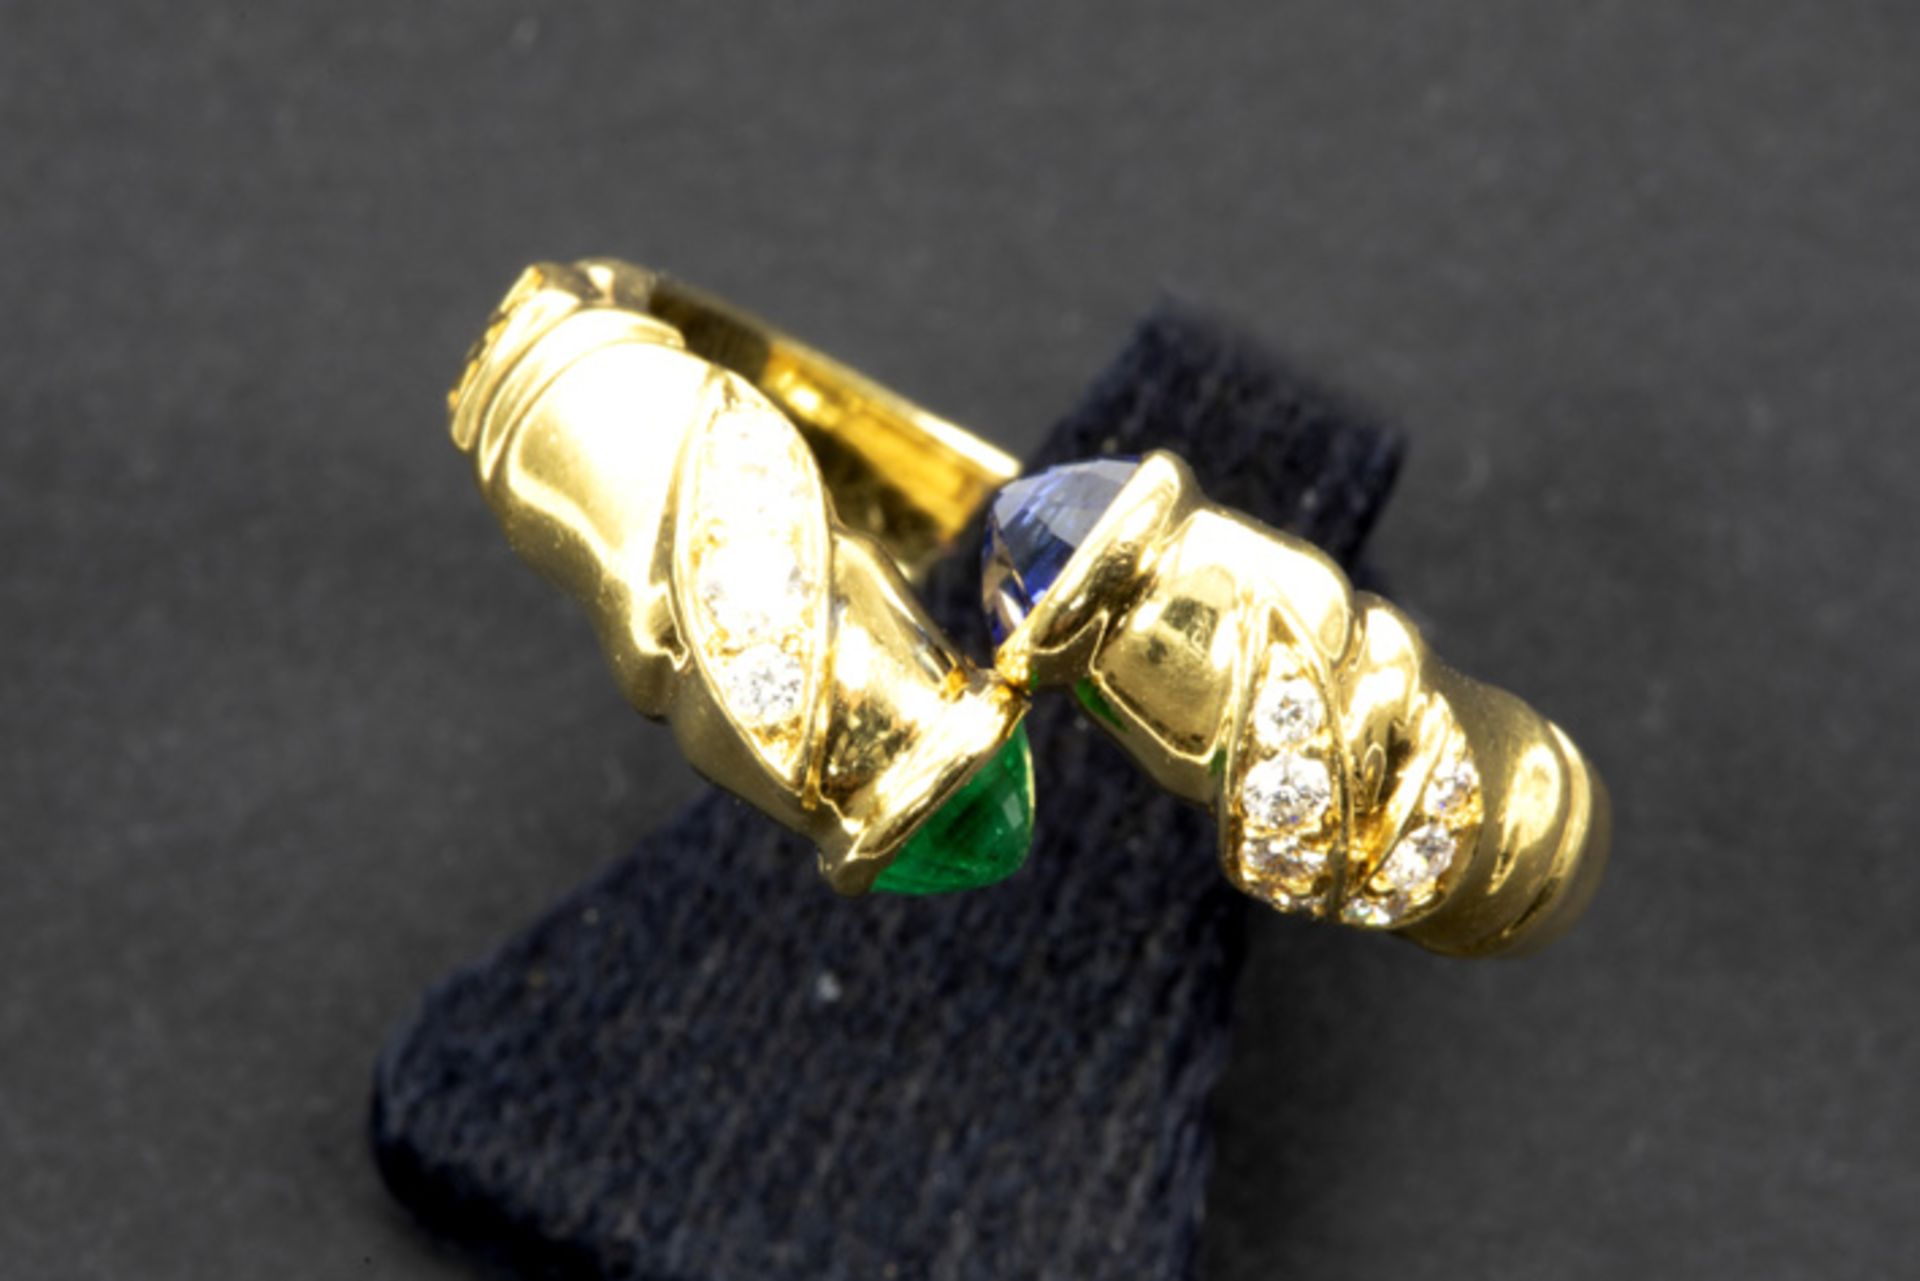 ring with a Cartier like design in yellow gold (18 carat) with a cabochon cut emerald and sapphire - Image 2 of 3